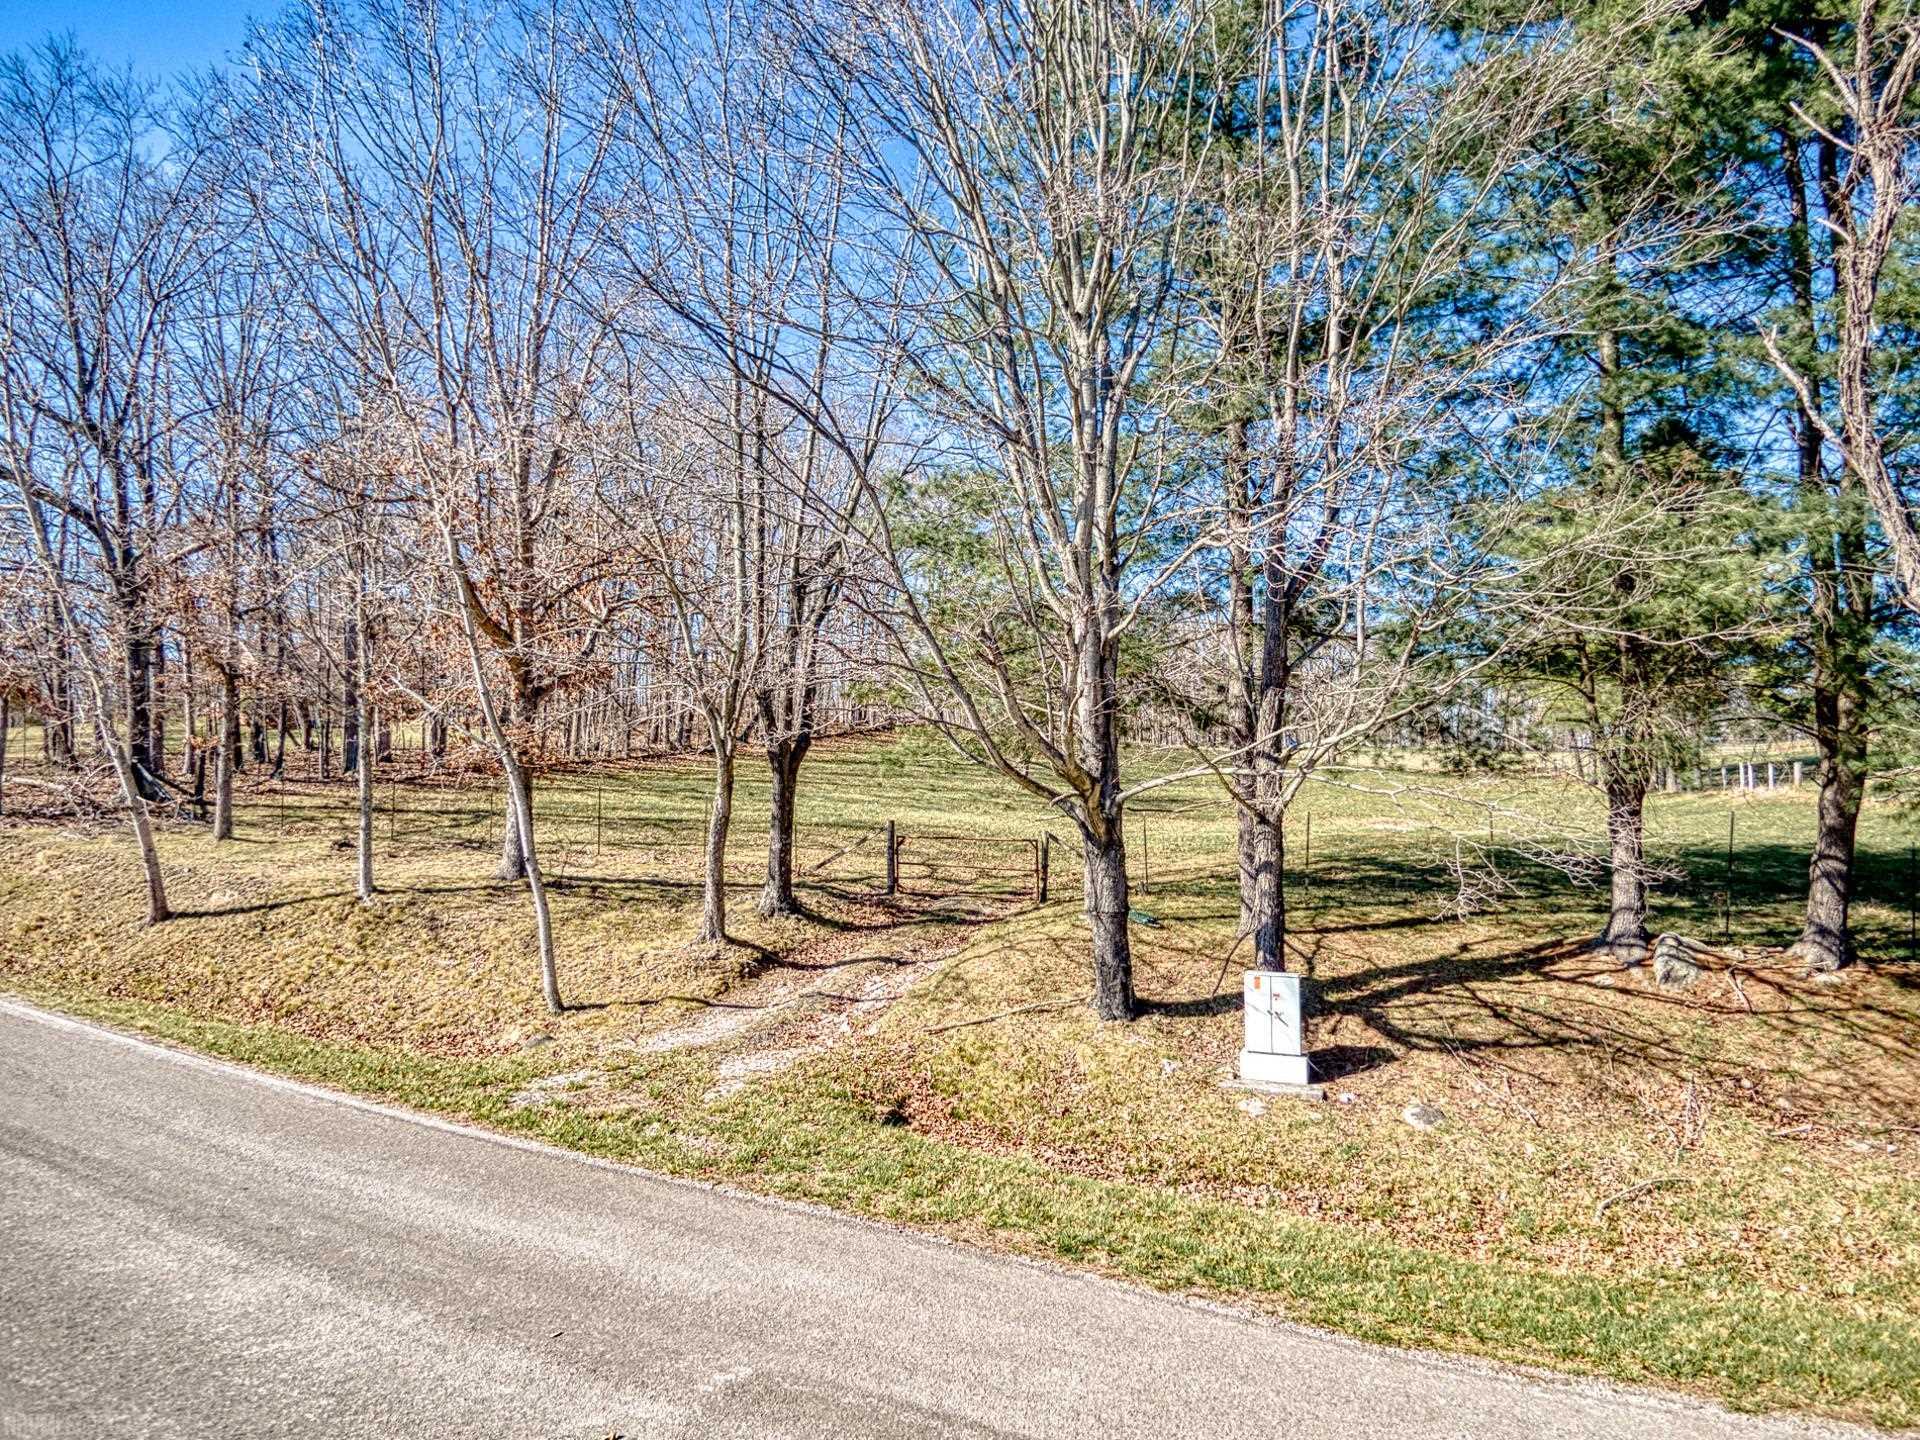 Come take a look at this beautiful cleared lot. This property in a great location in the middle of Radford, Christiansburg and Blacksburg and close to Virginia Tech, Radford University and prime location for the nature lover. This lot would make a great home site.